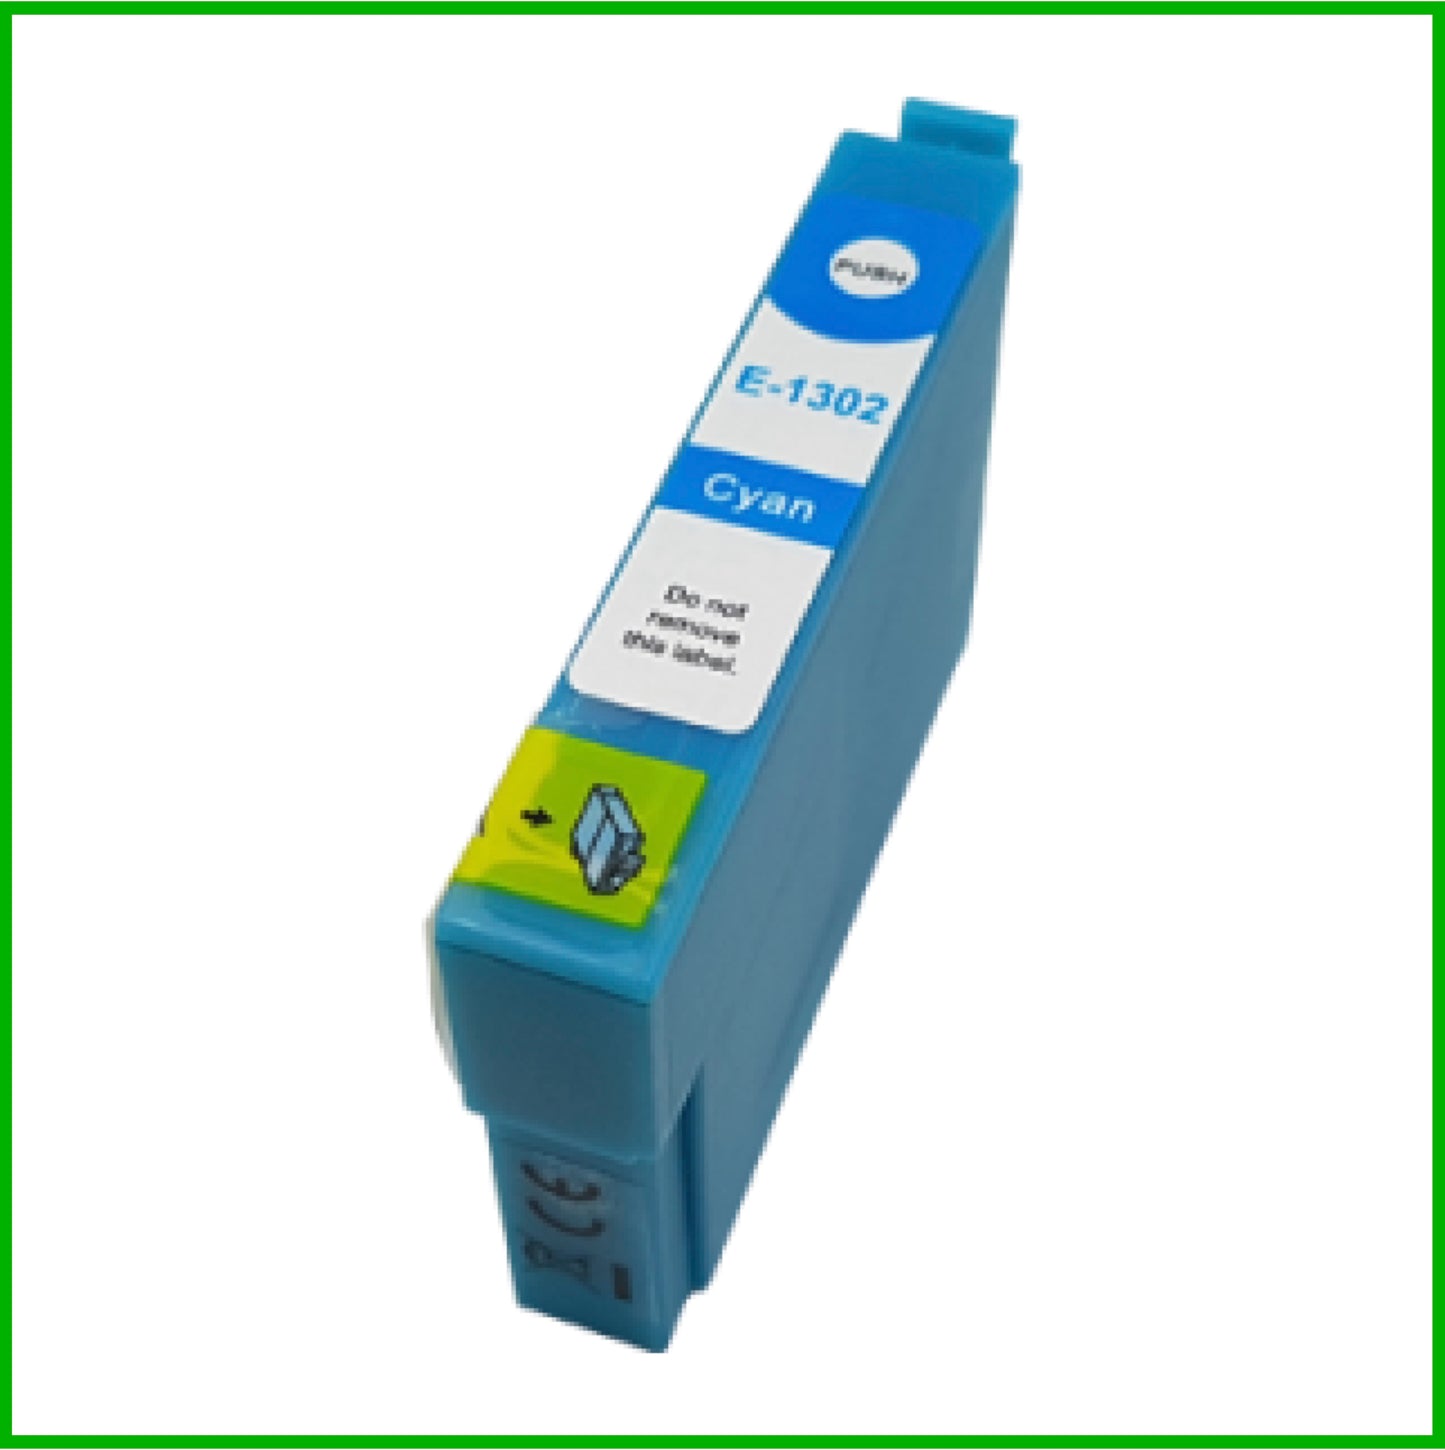 Compatible Epson T1302 Cyan Ink Cartridges (Stag)